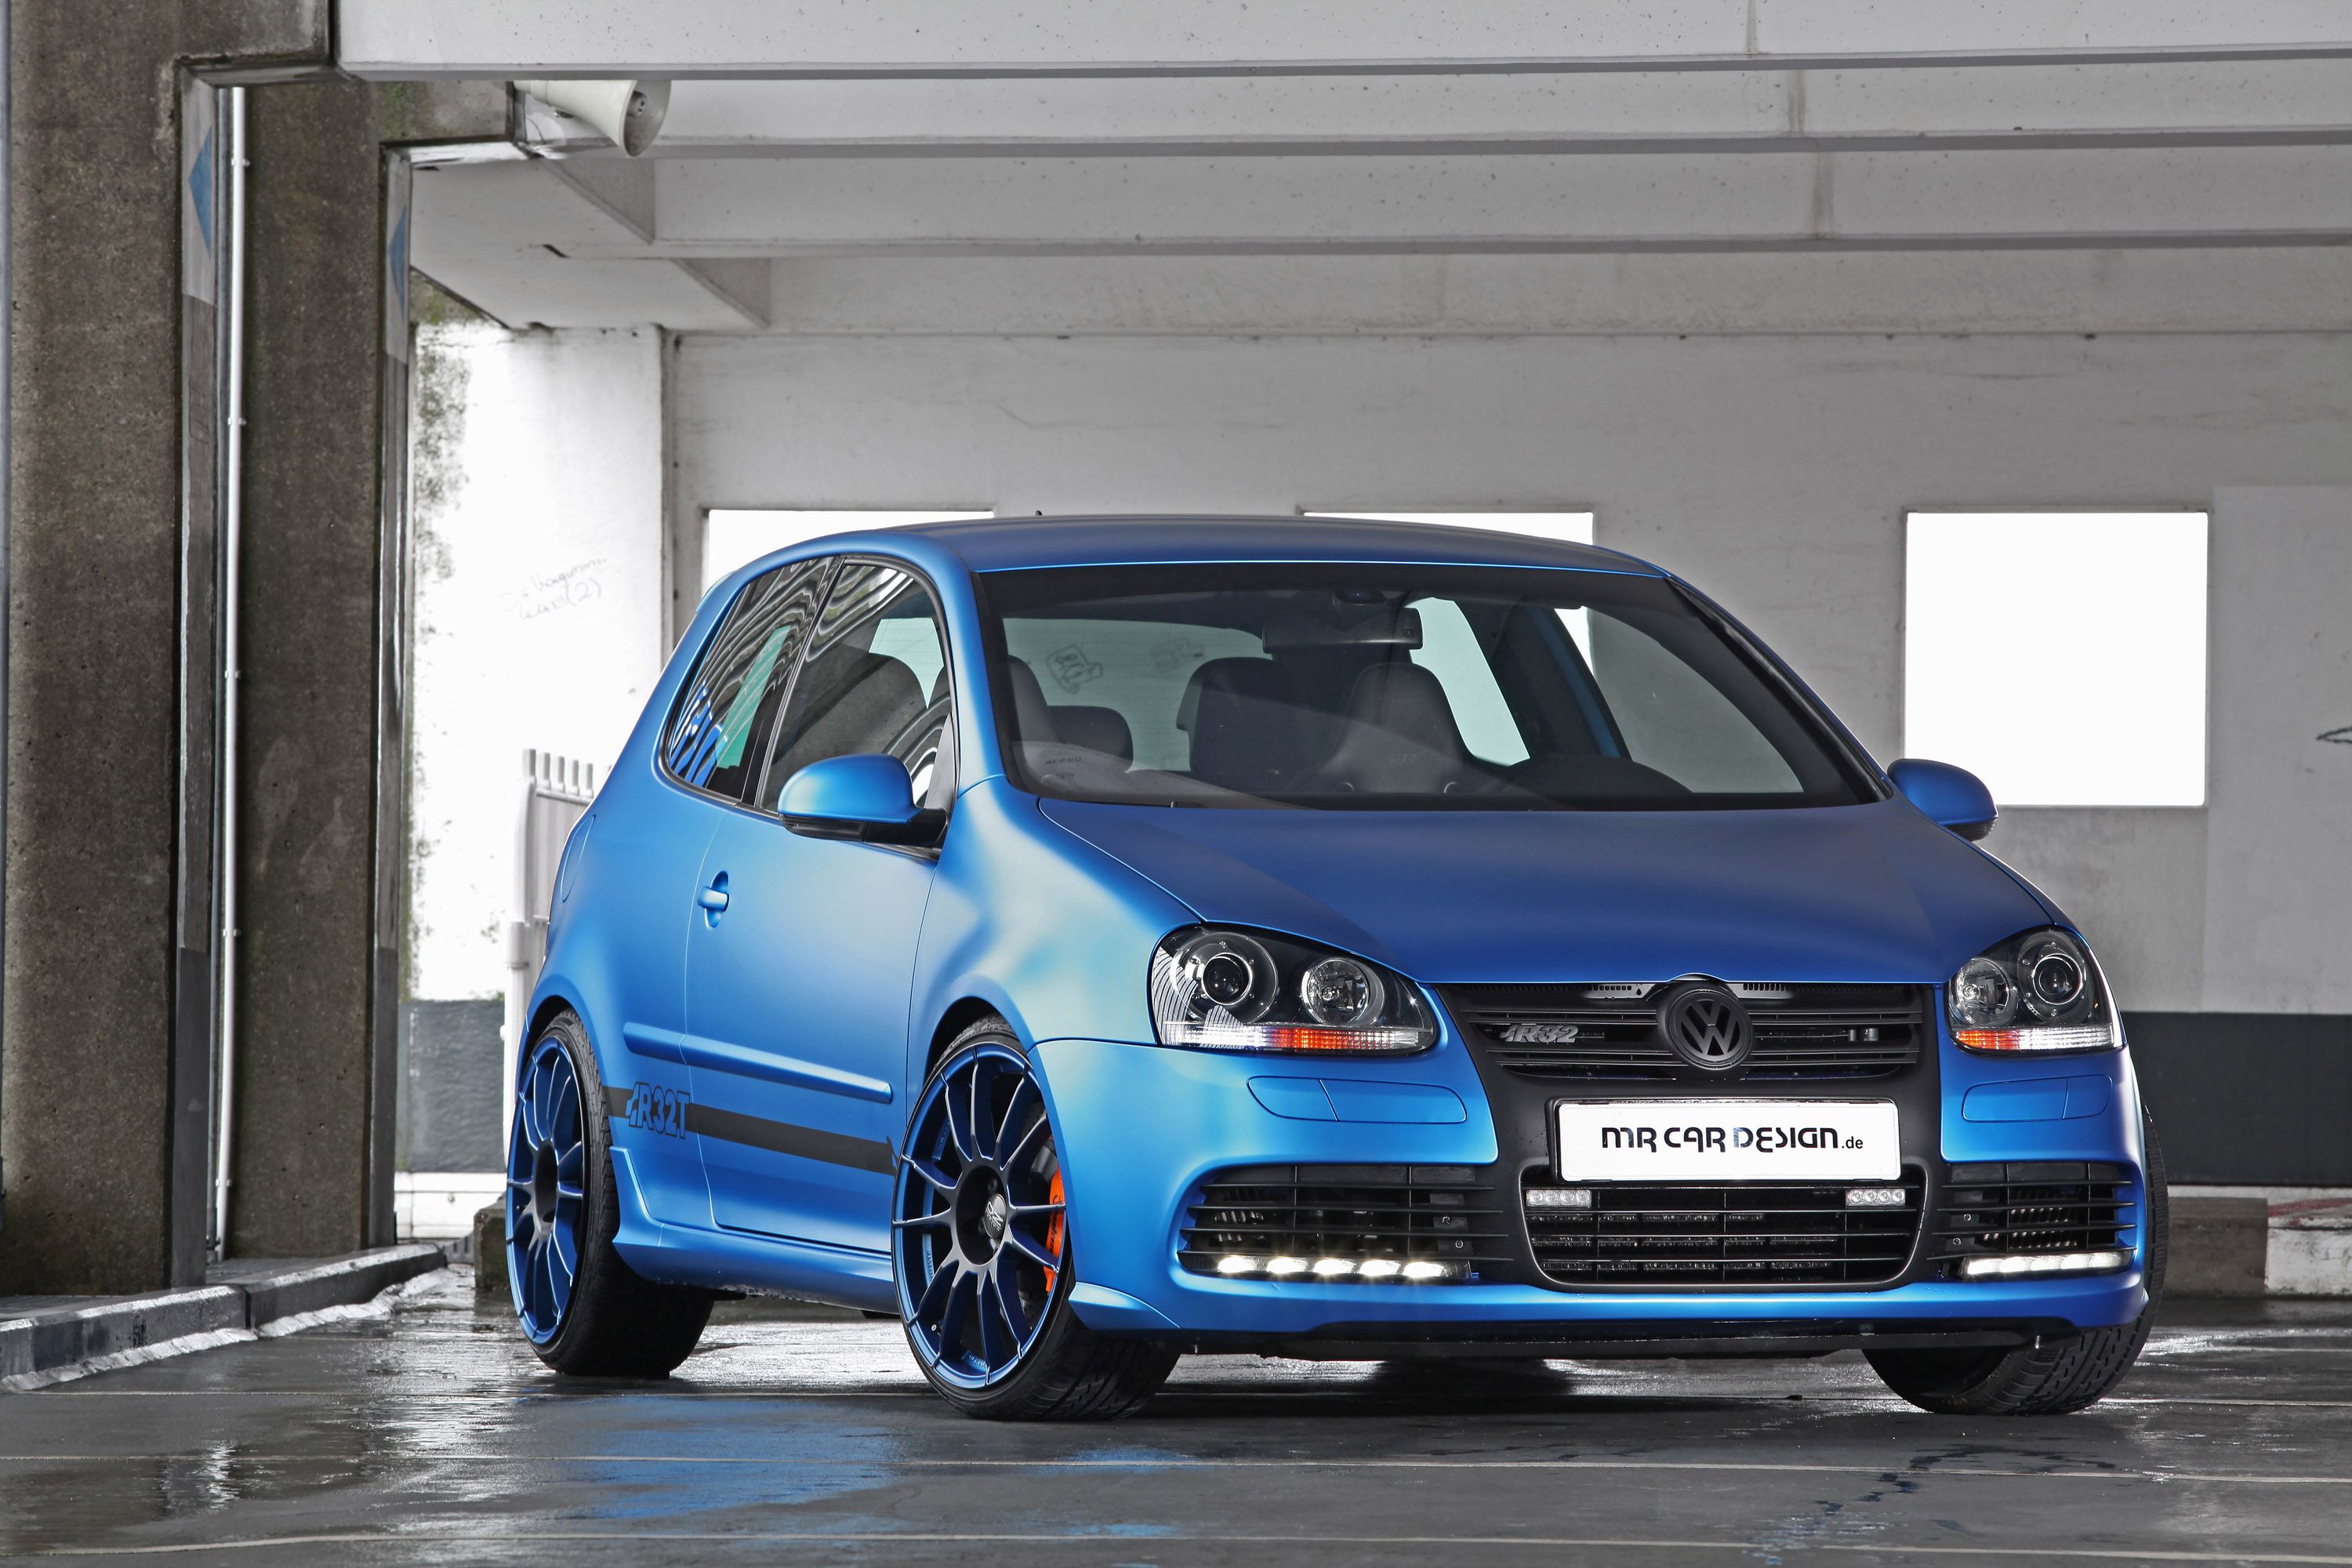 The upcoming classic caR: the Golf Mk5 R32.